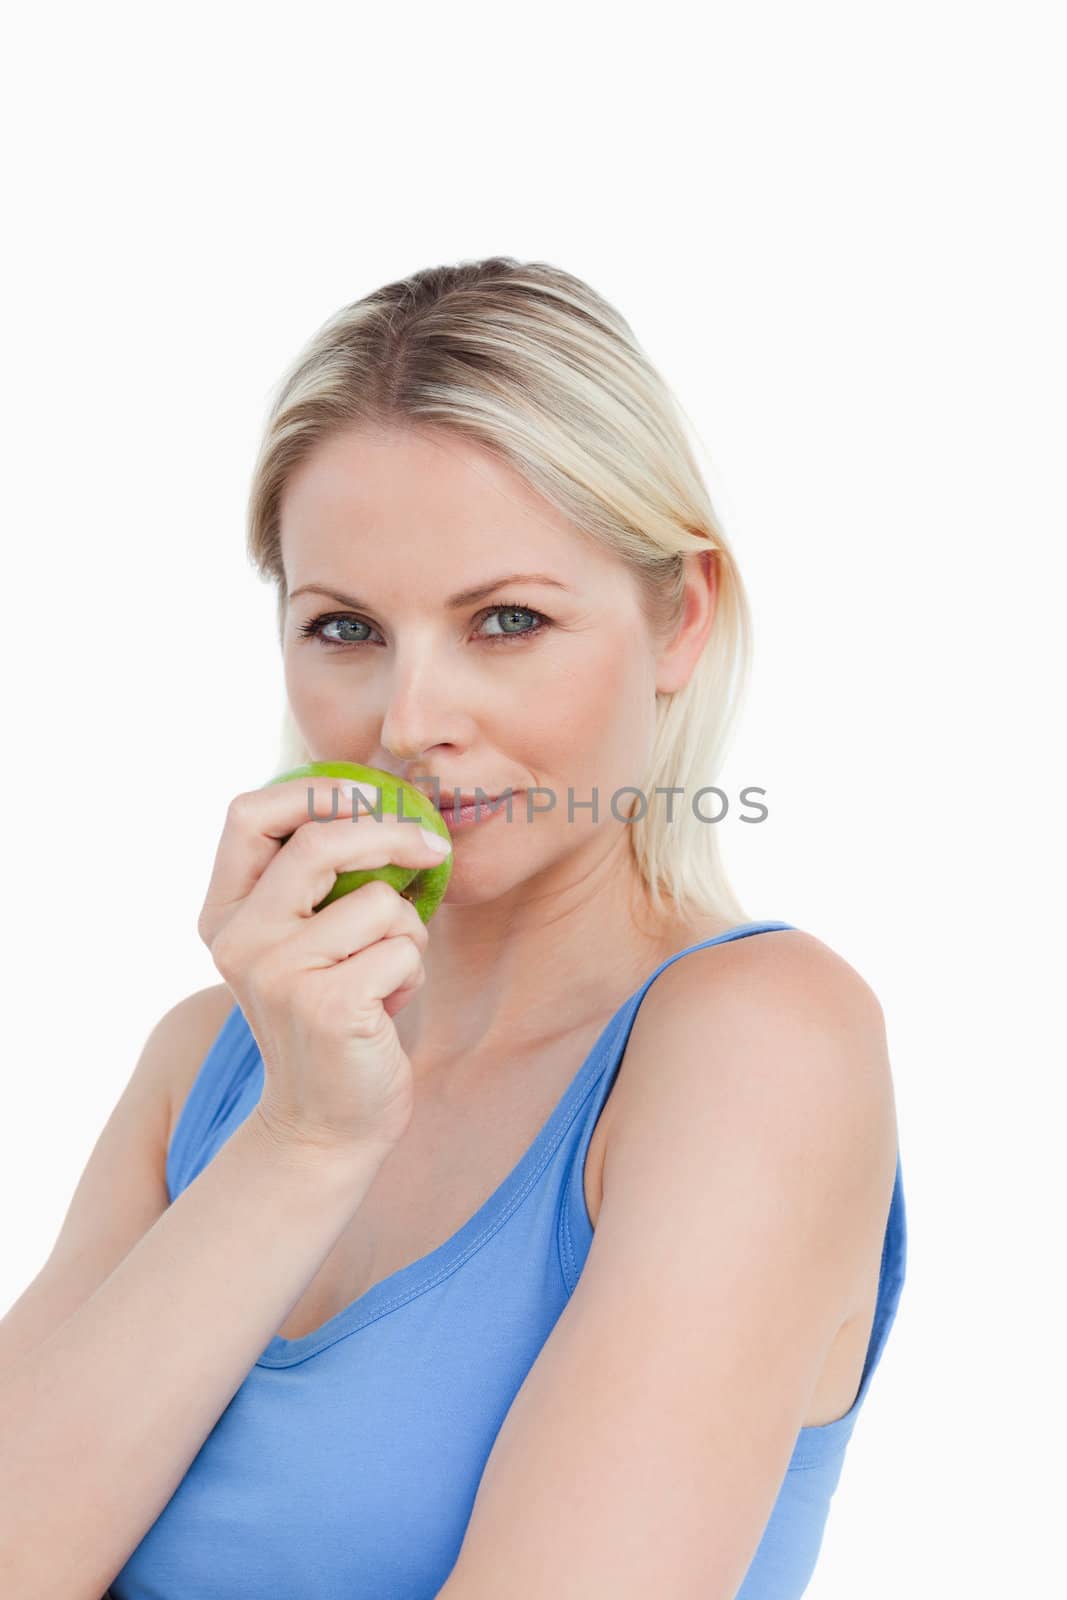 Blonde woman holding an apple close to her mouth against a white background